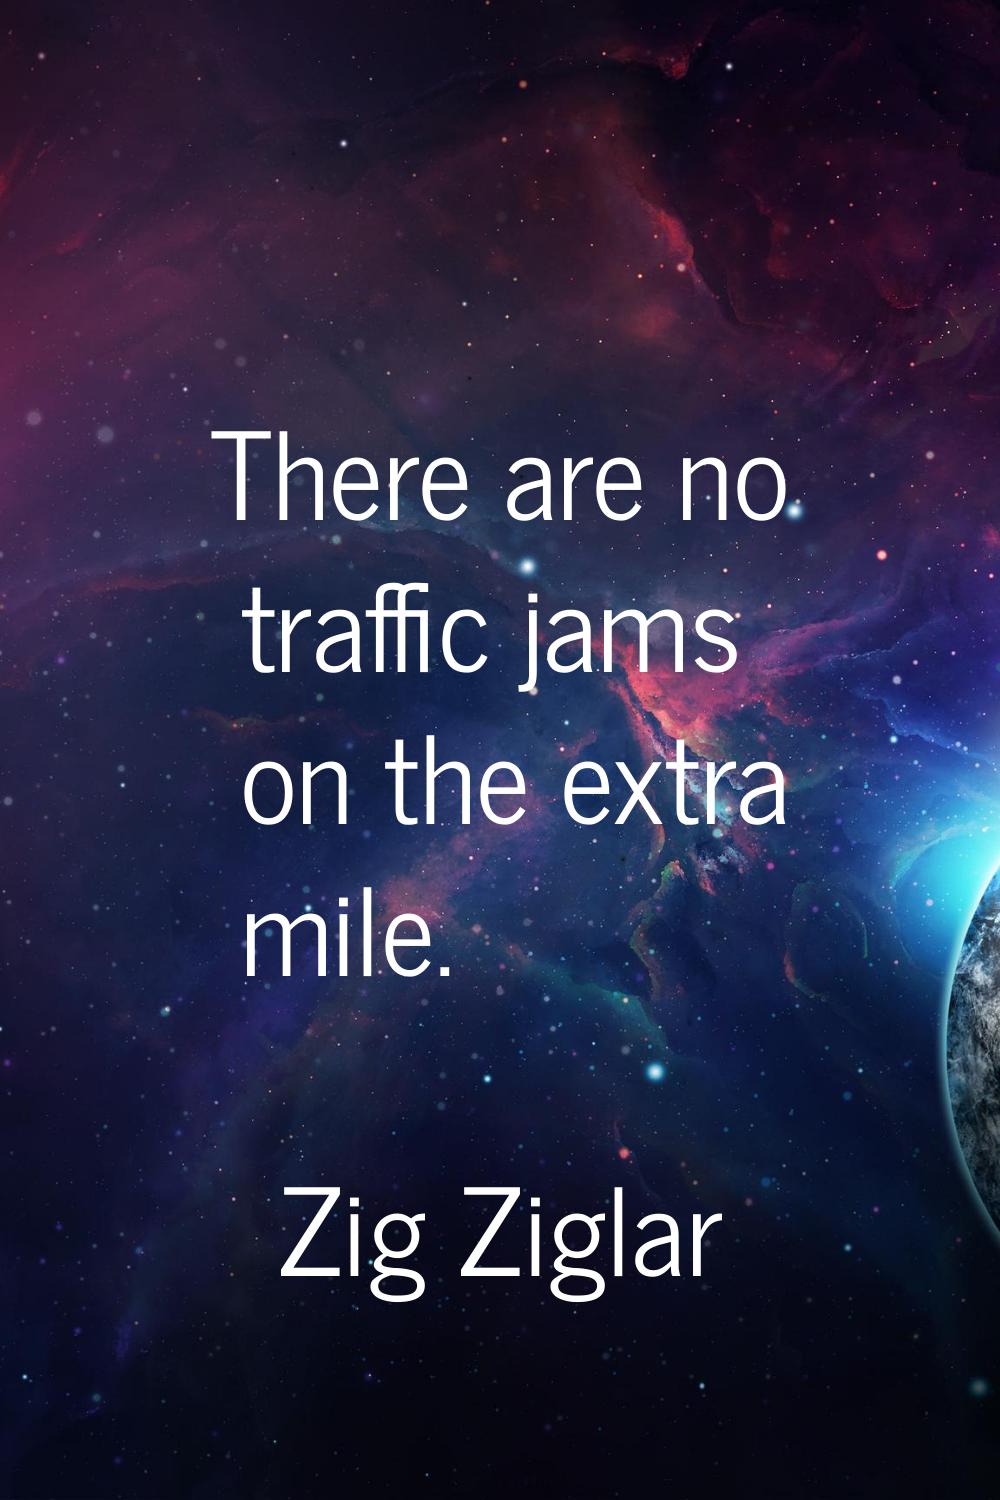 There are no traffic jams on the extra mile.